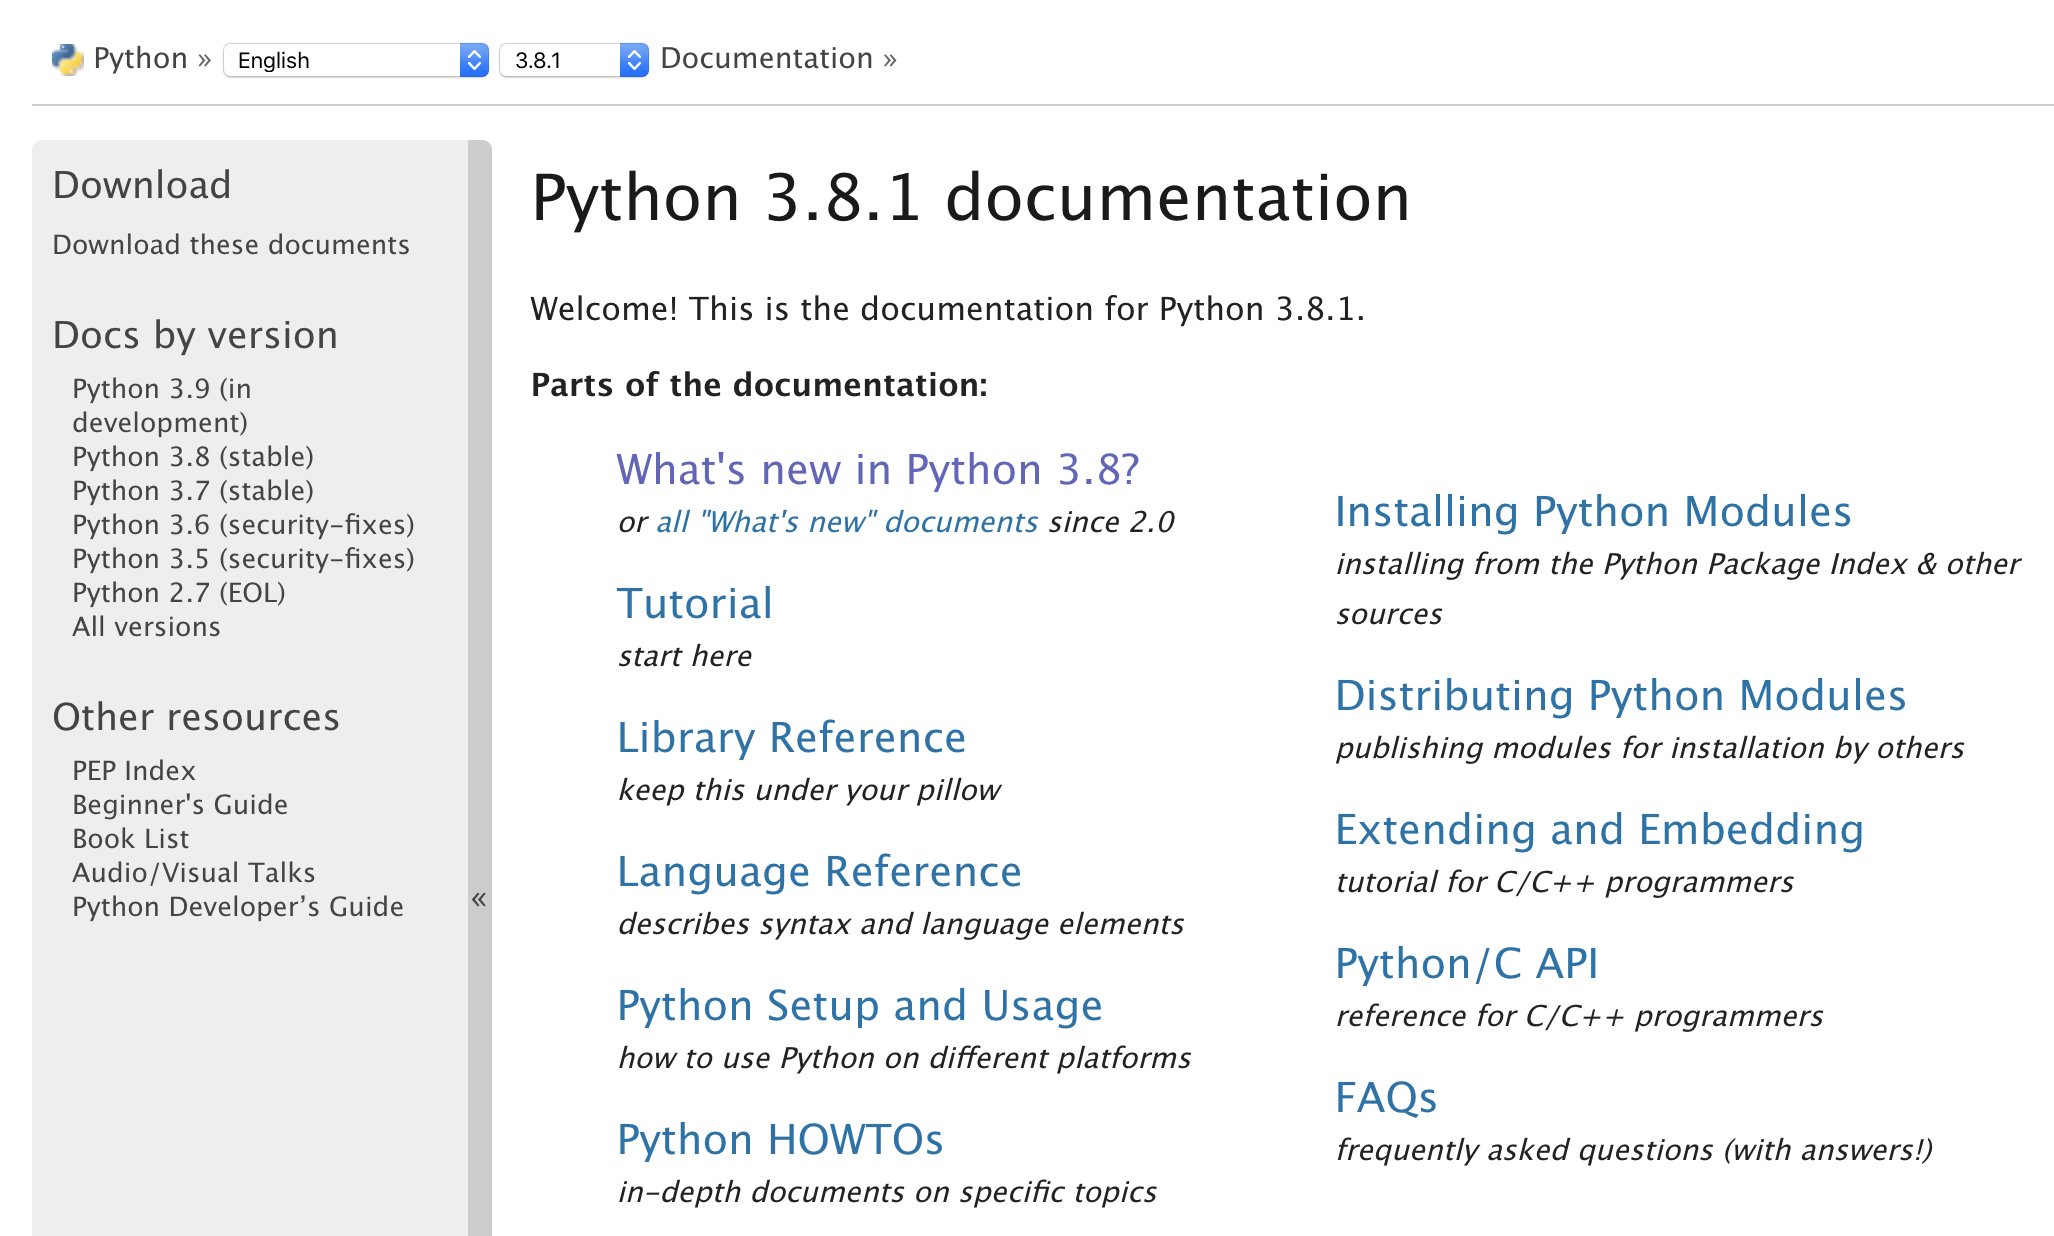 _images/Python-doc-page.png